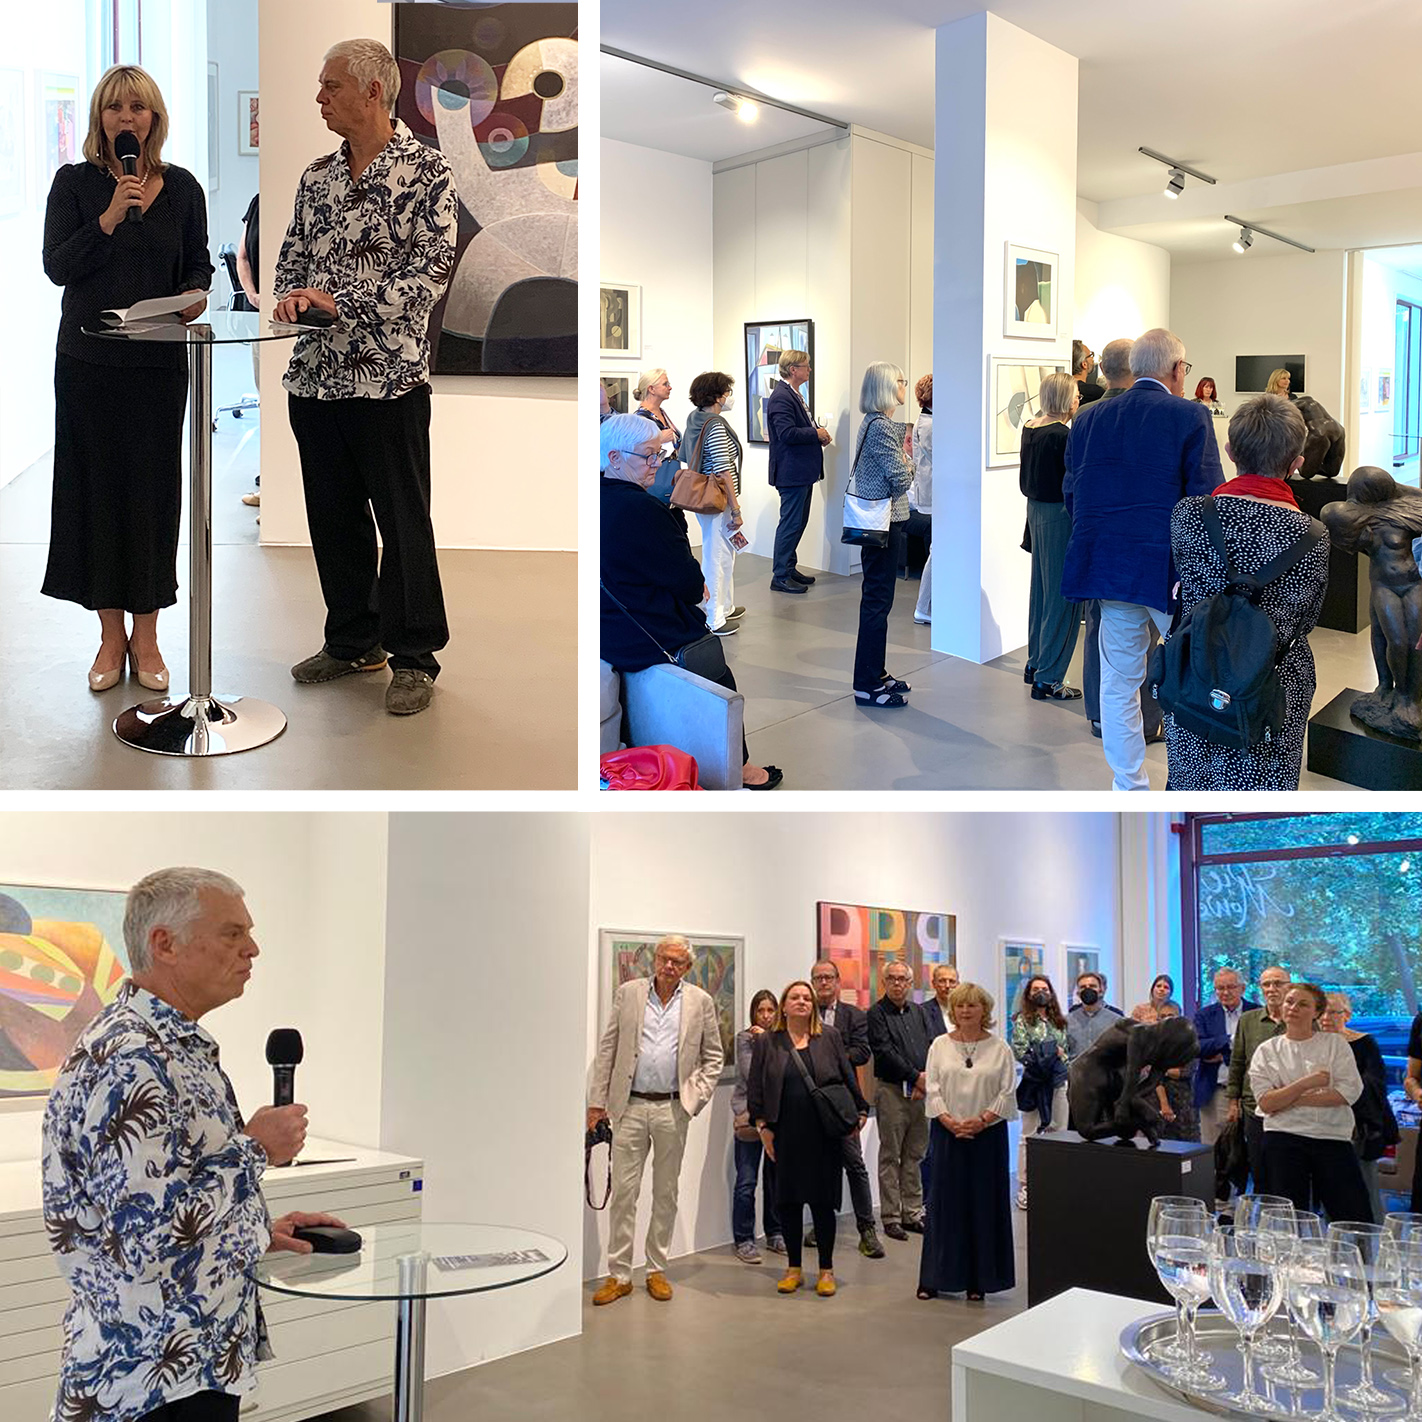 Impressions of the opening "Back to the City"